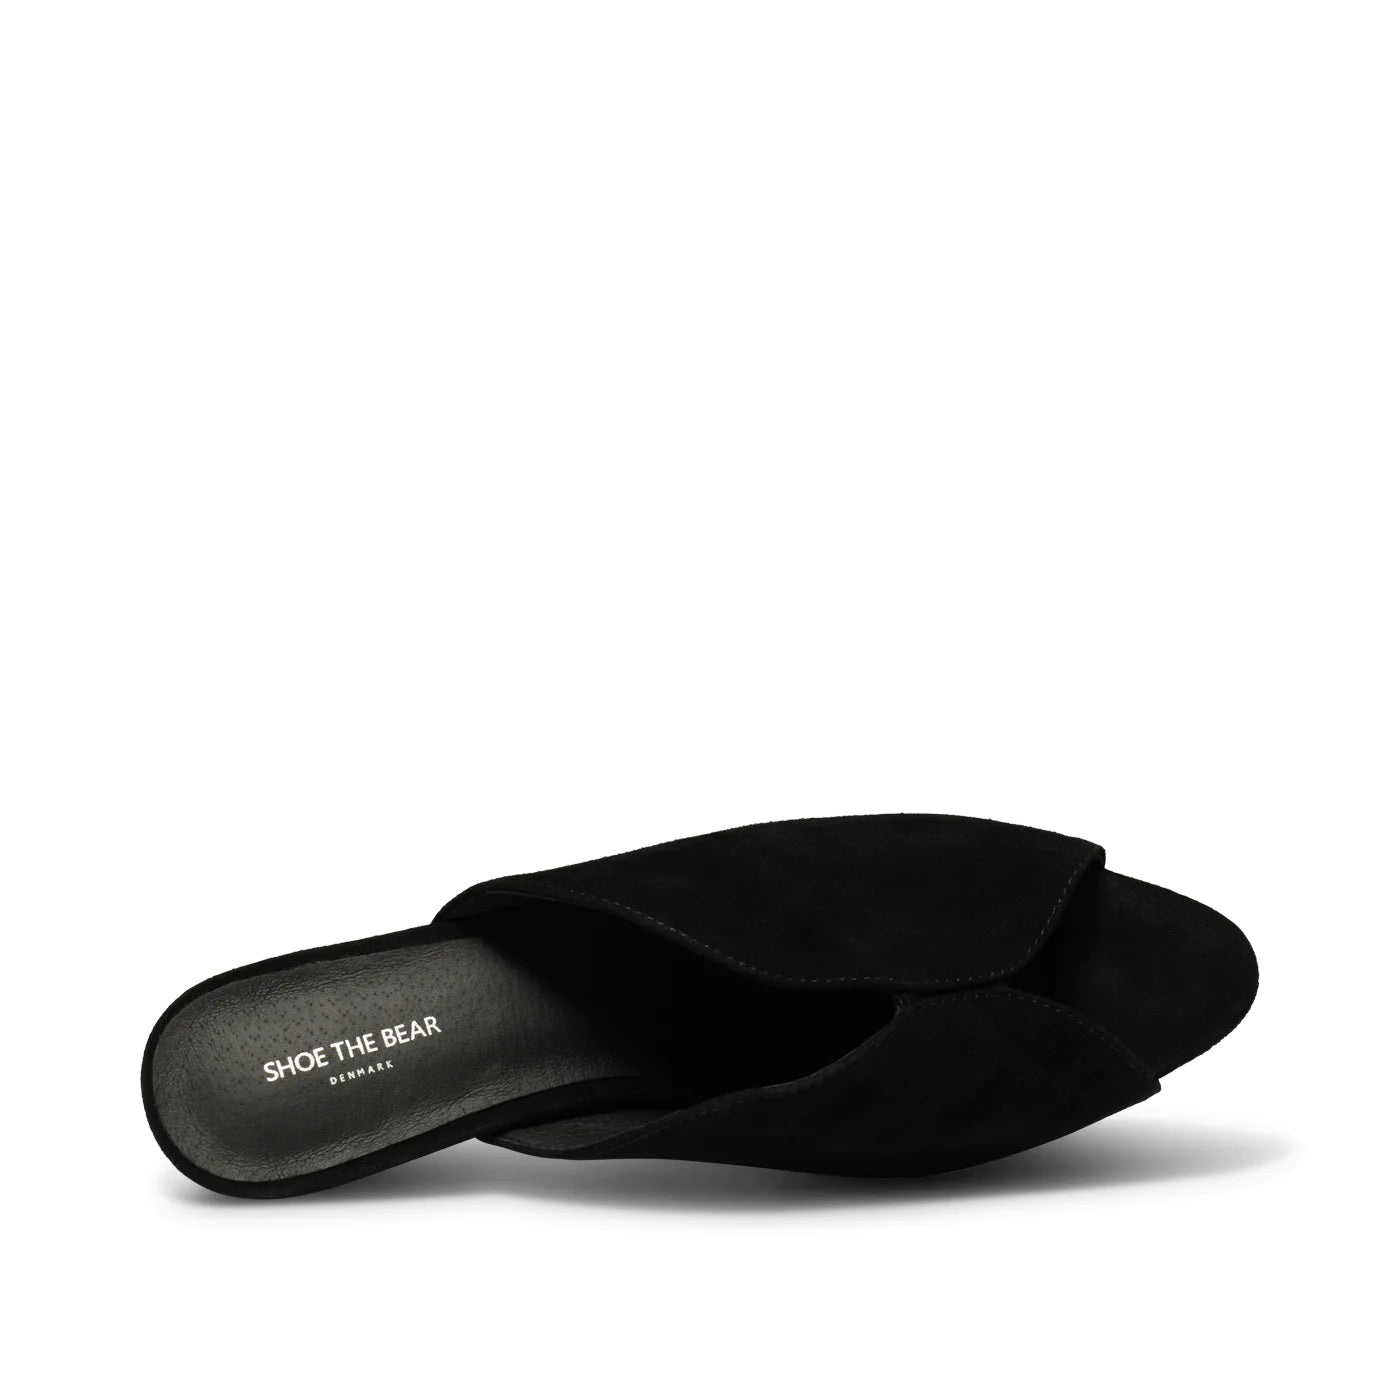 Valentine Sandal in Black by Shoe The Bear